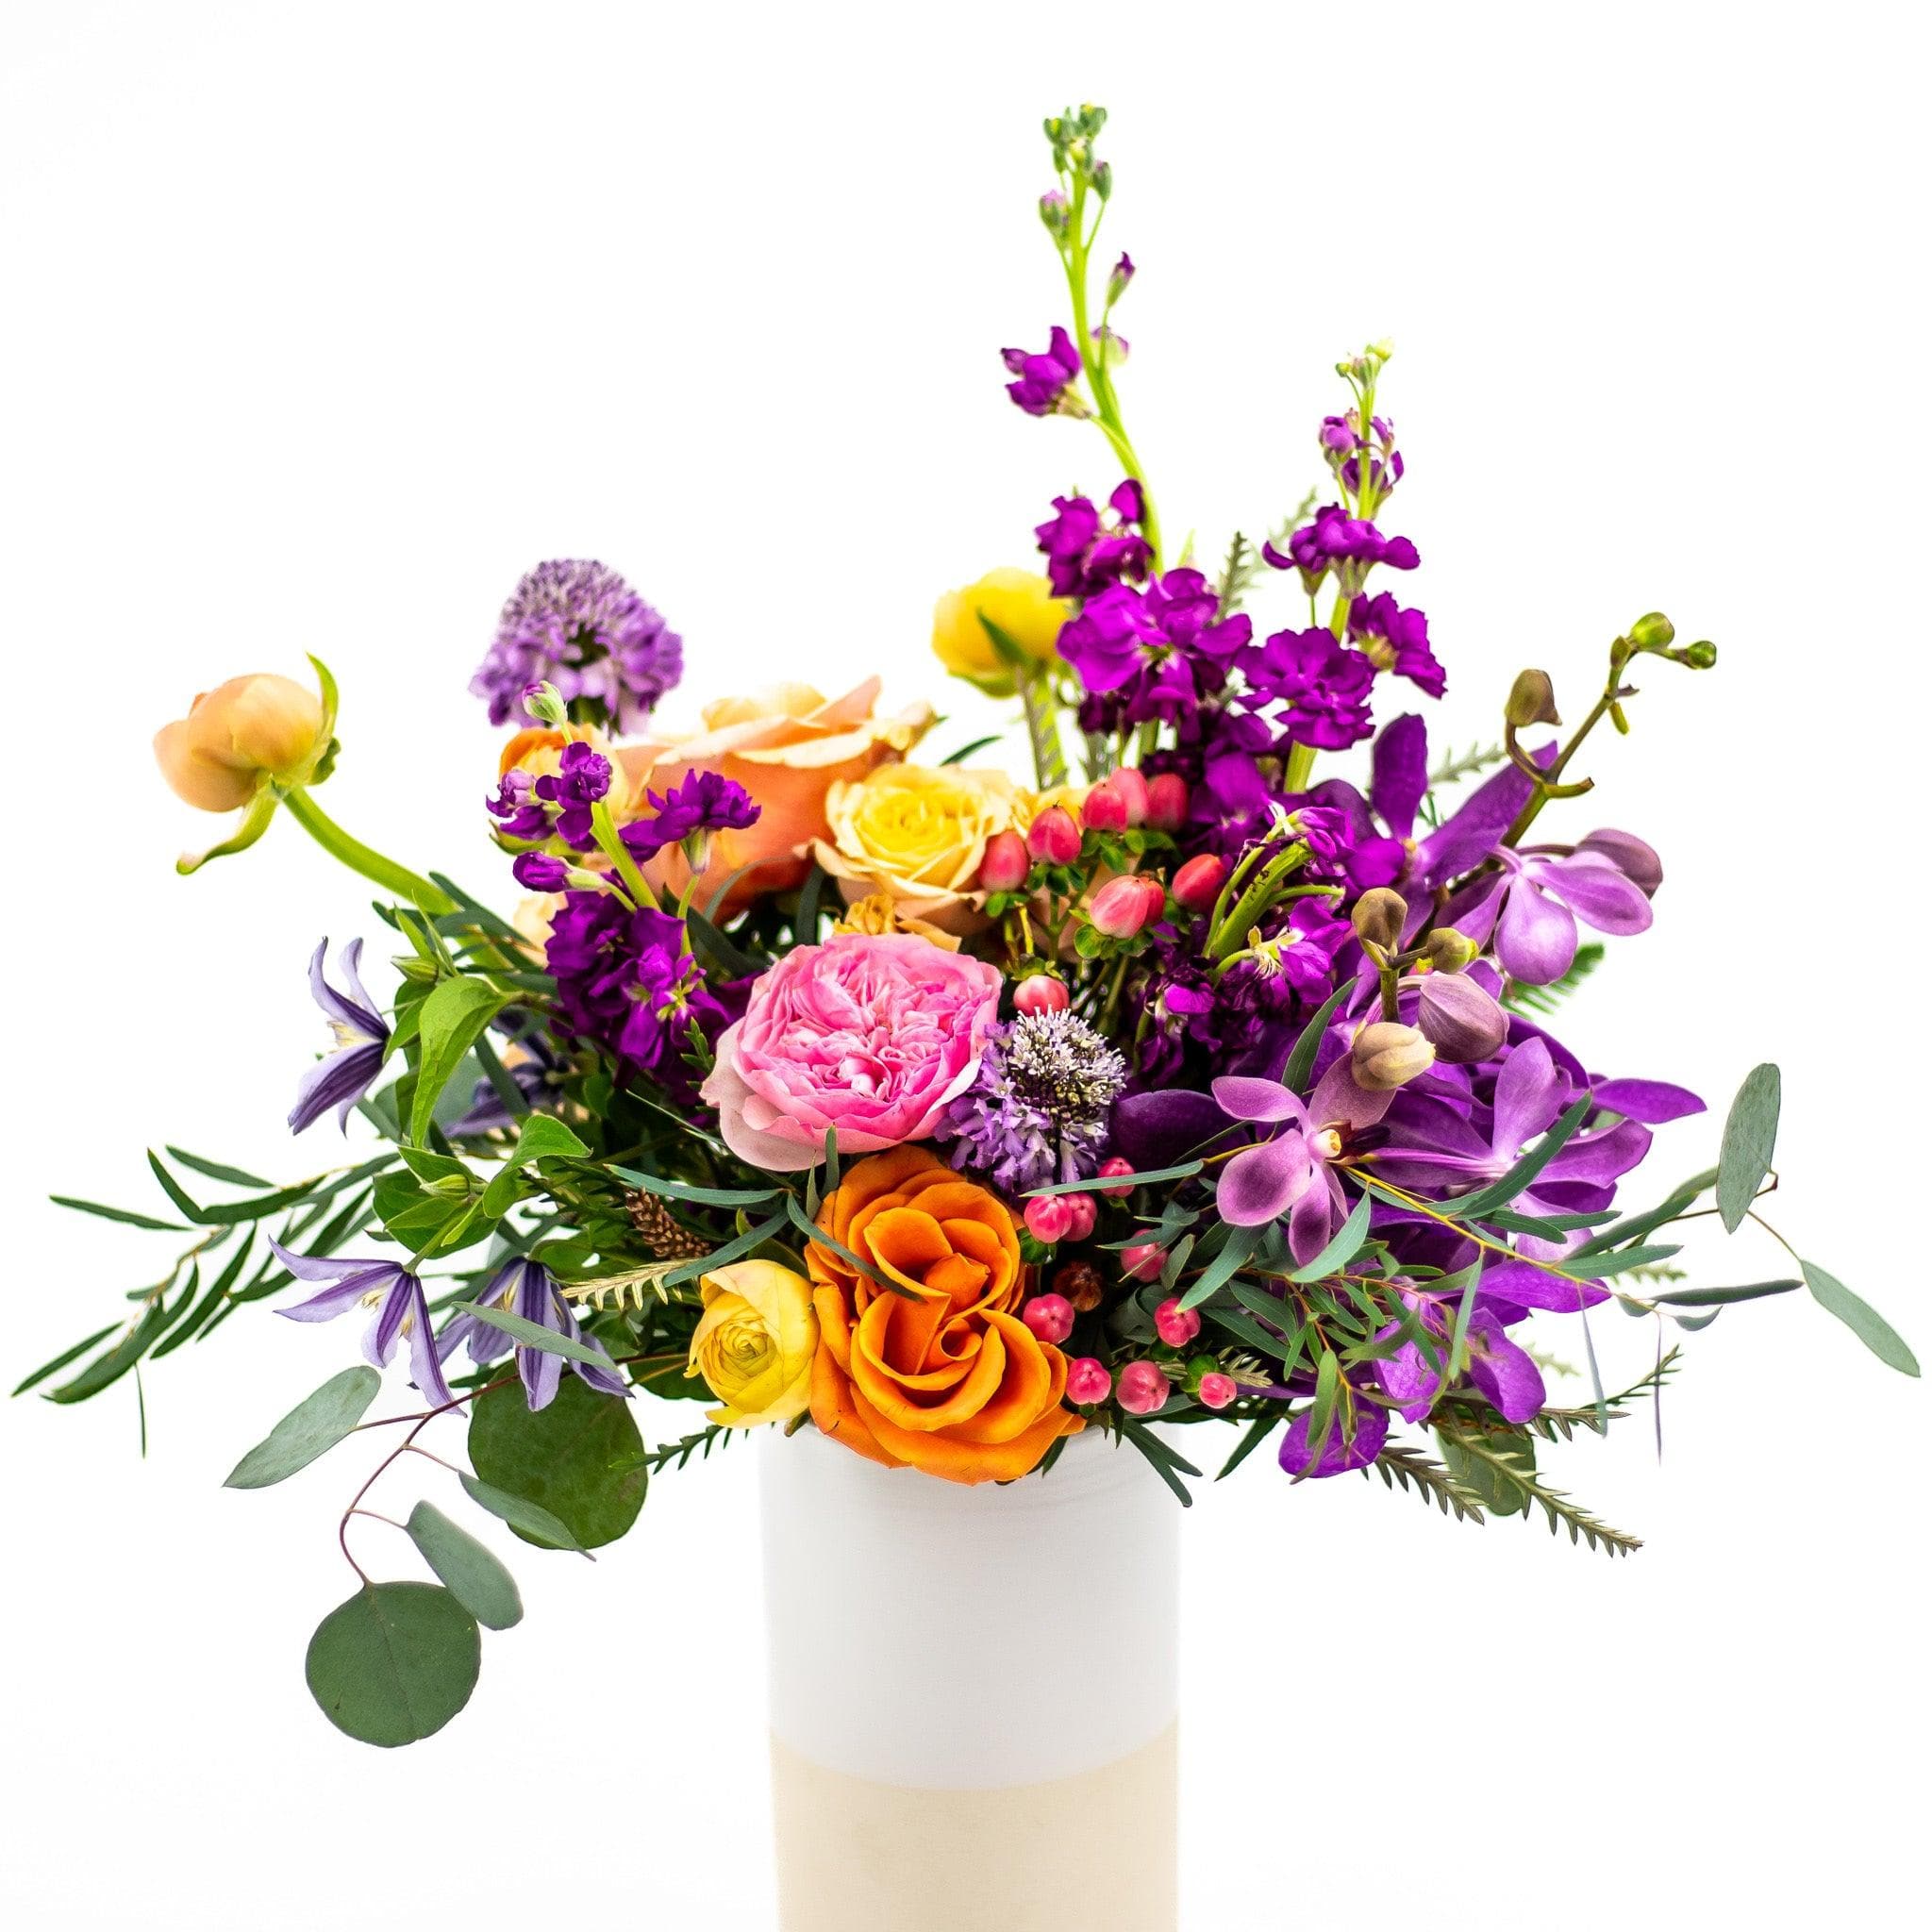 Cheerful Spring Floral - Green Fresh Florals + Plants